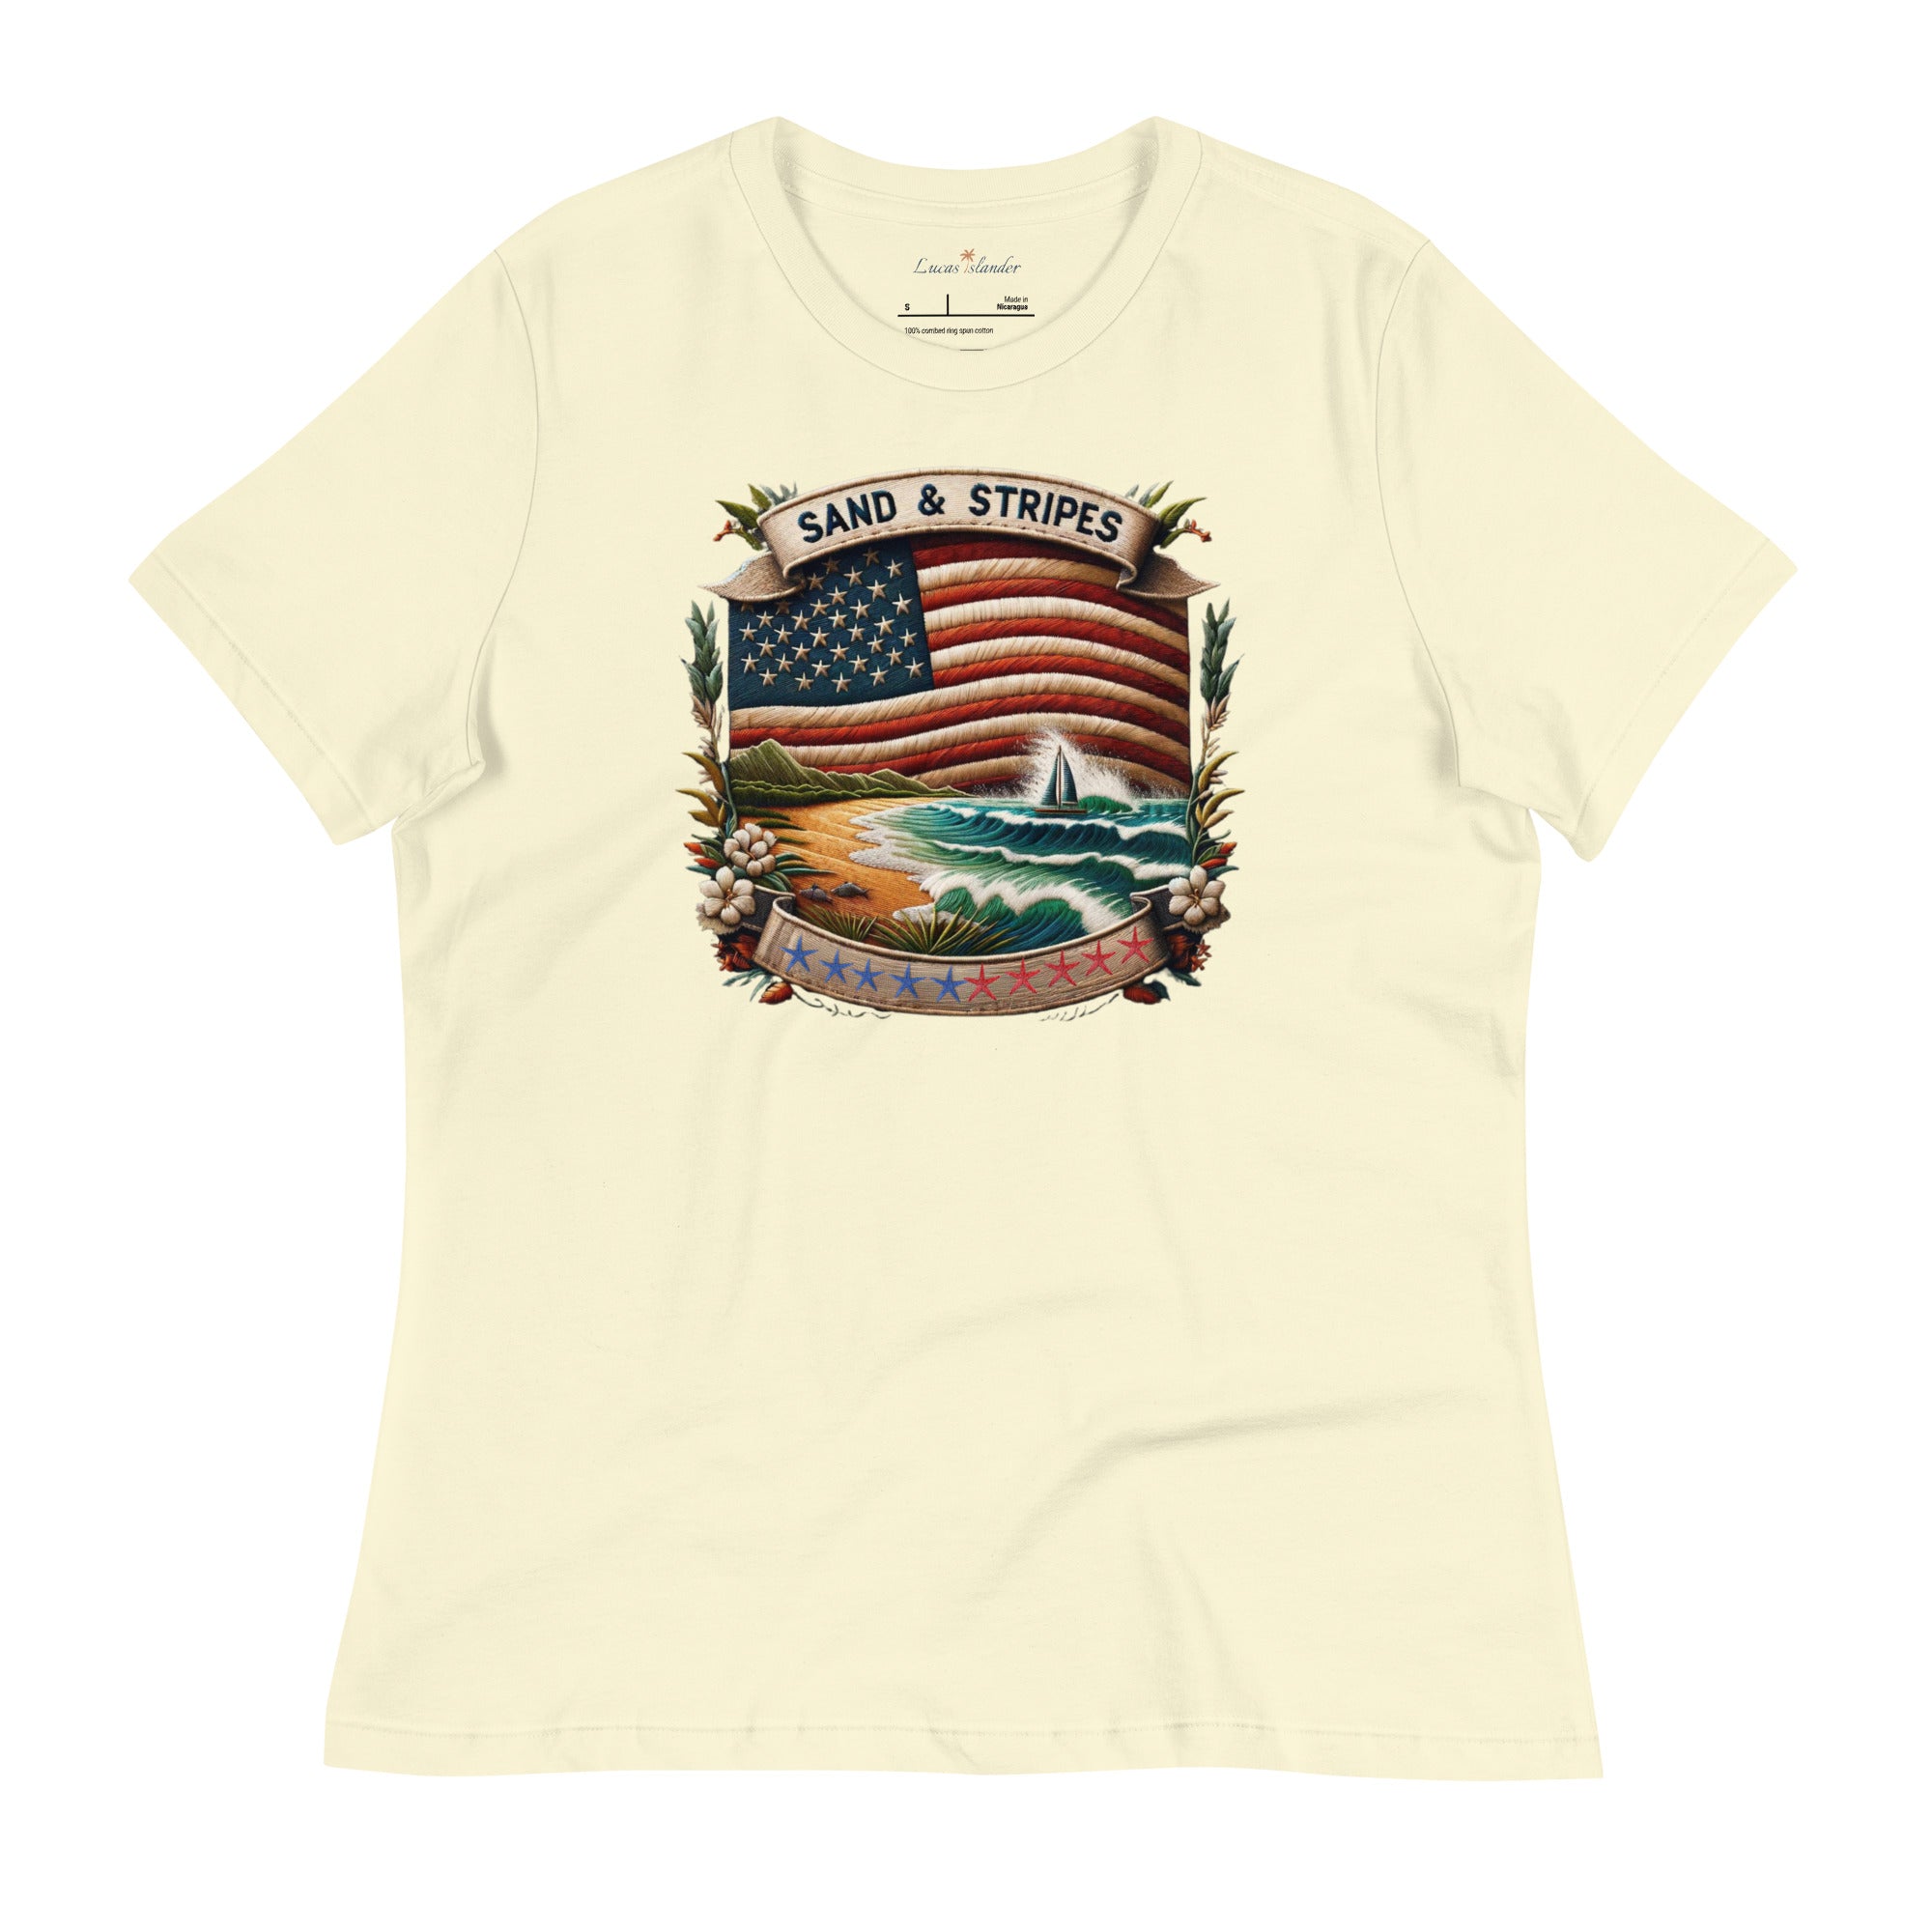 Discover Comfort and Style: Sands & Stripes T-shirt by Lucas Islander Relaxed T-Shirt